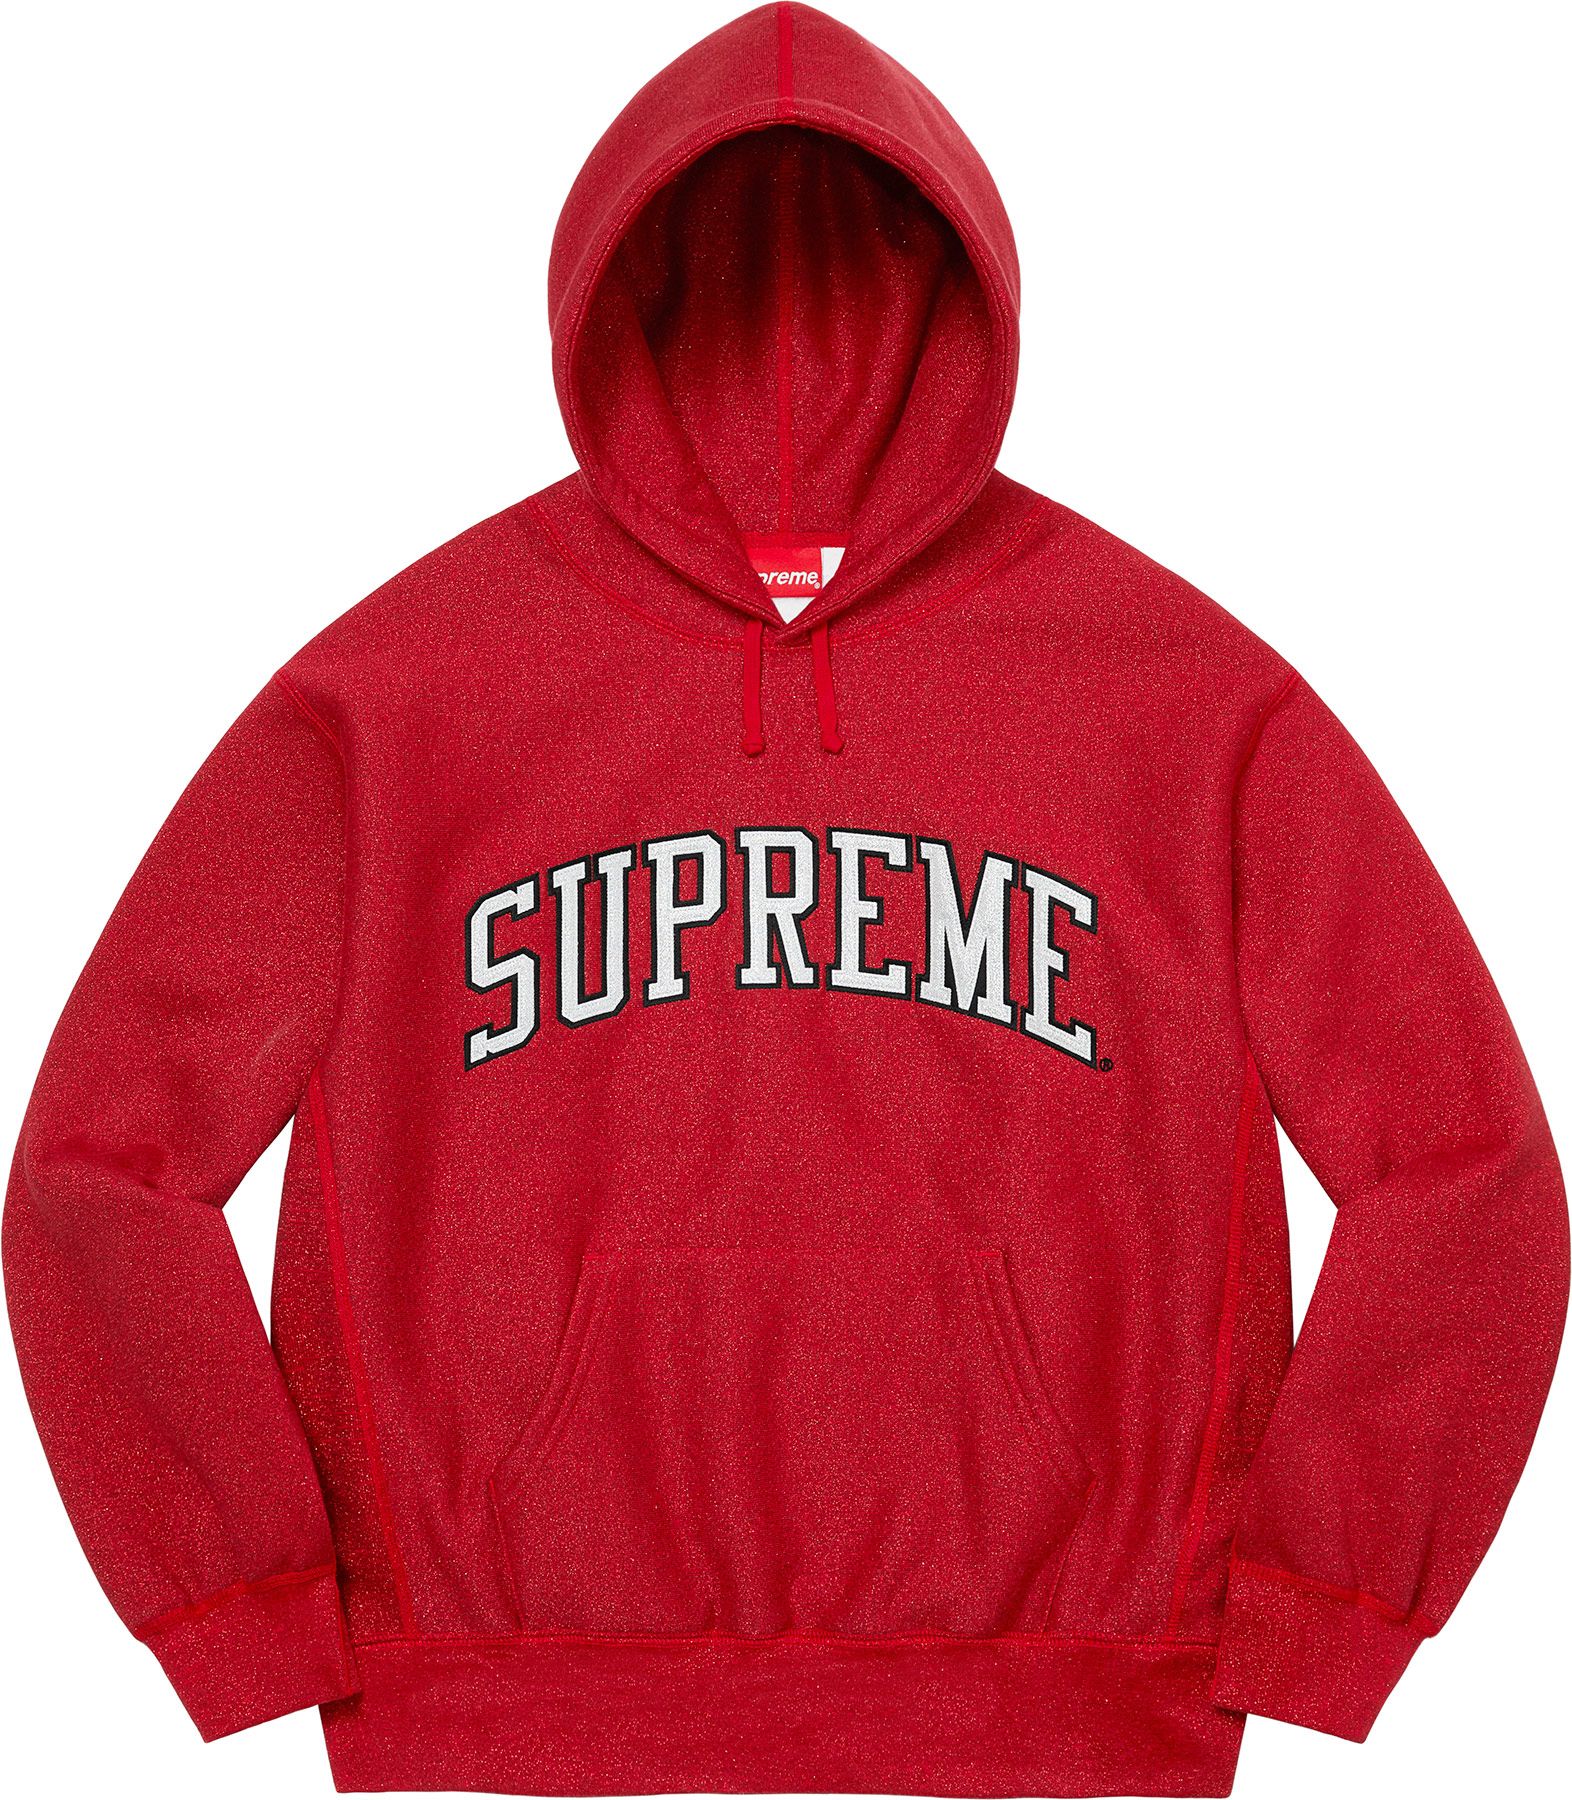 Inside Out Box Logo Hooded Sweatshirt - Spring/Summer 2023 Preview 